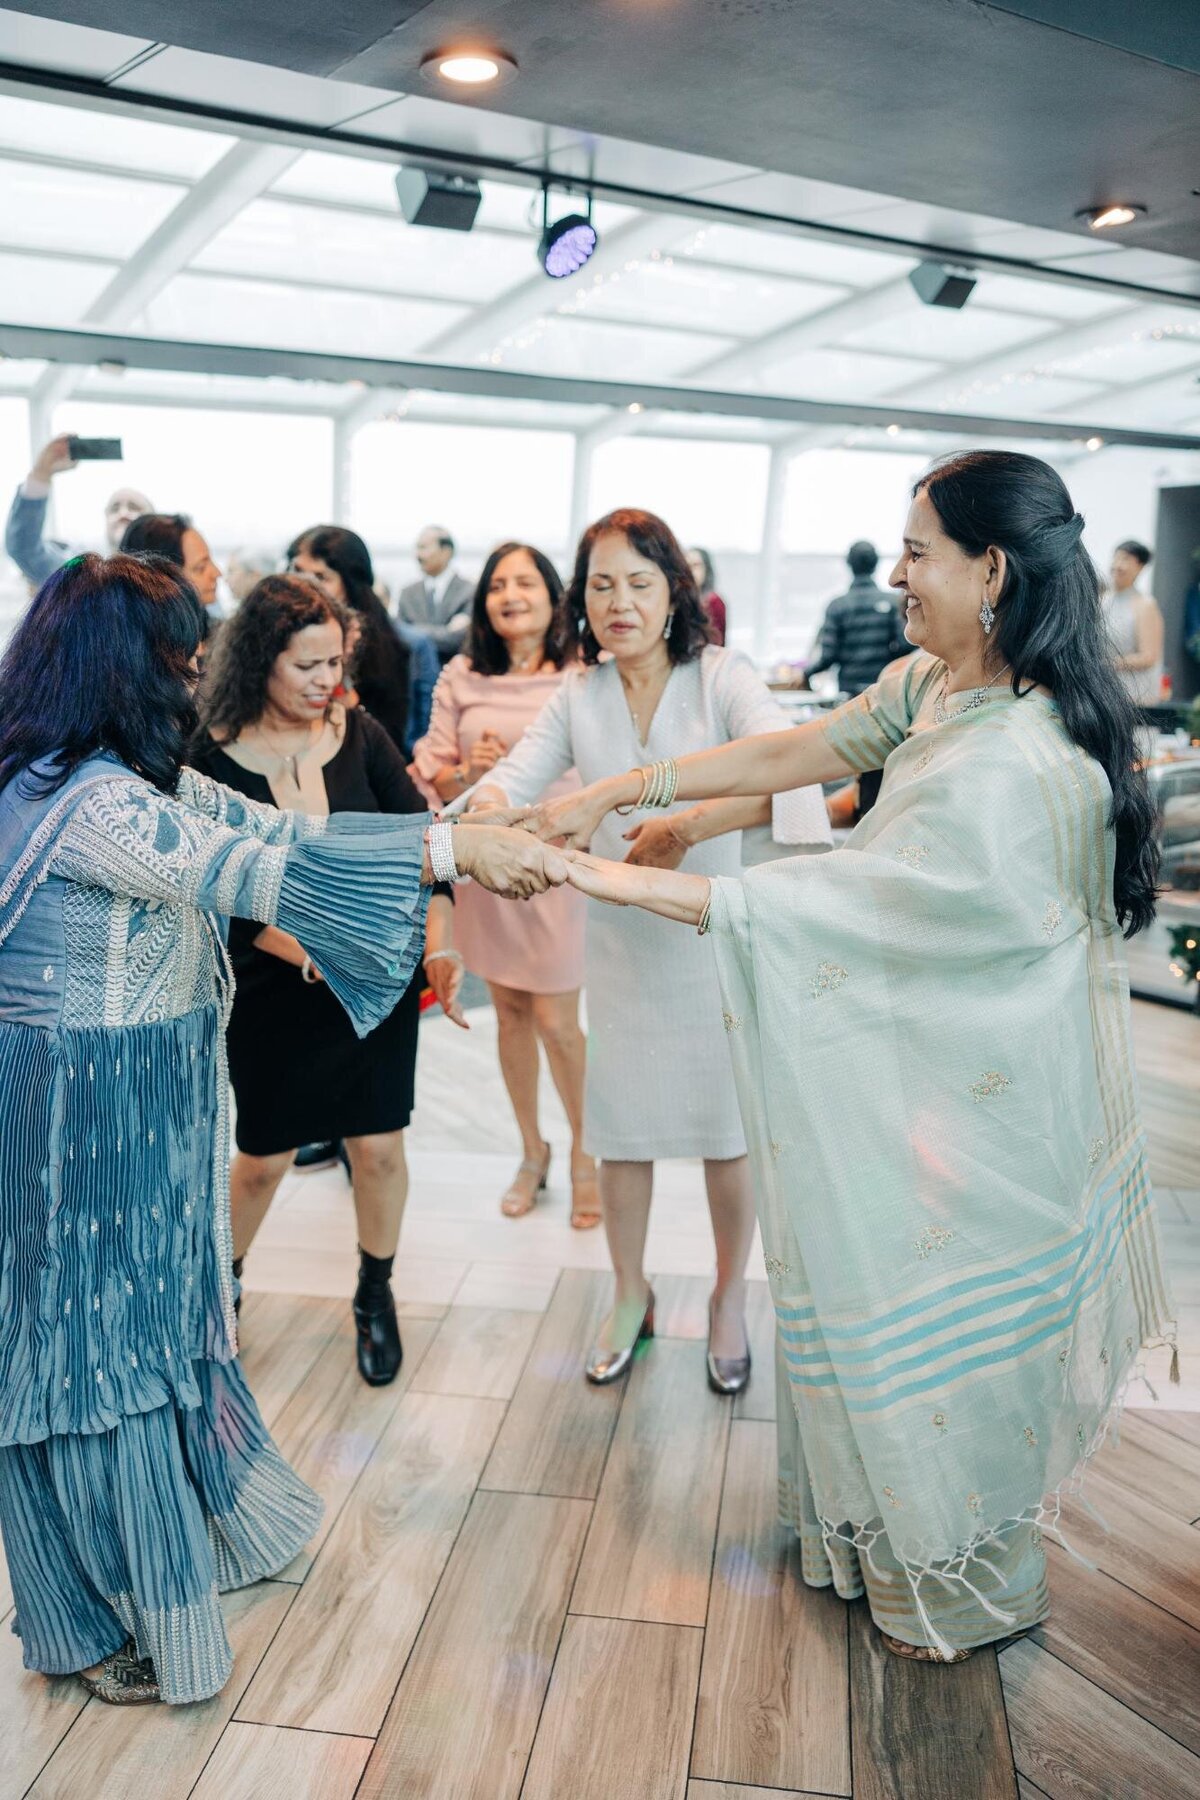 Women in traditional and casual attire dancing in a circle at an indoor event, smiling and holding hands.